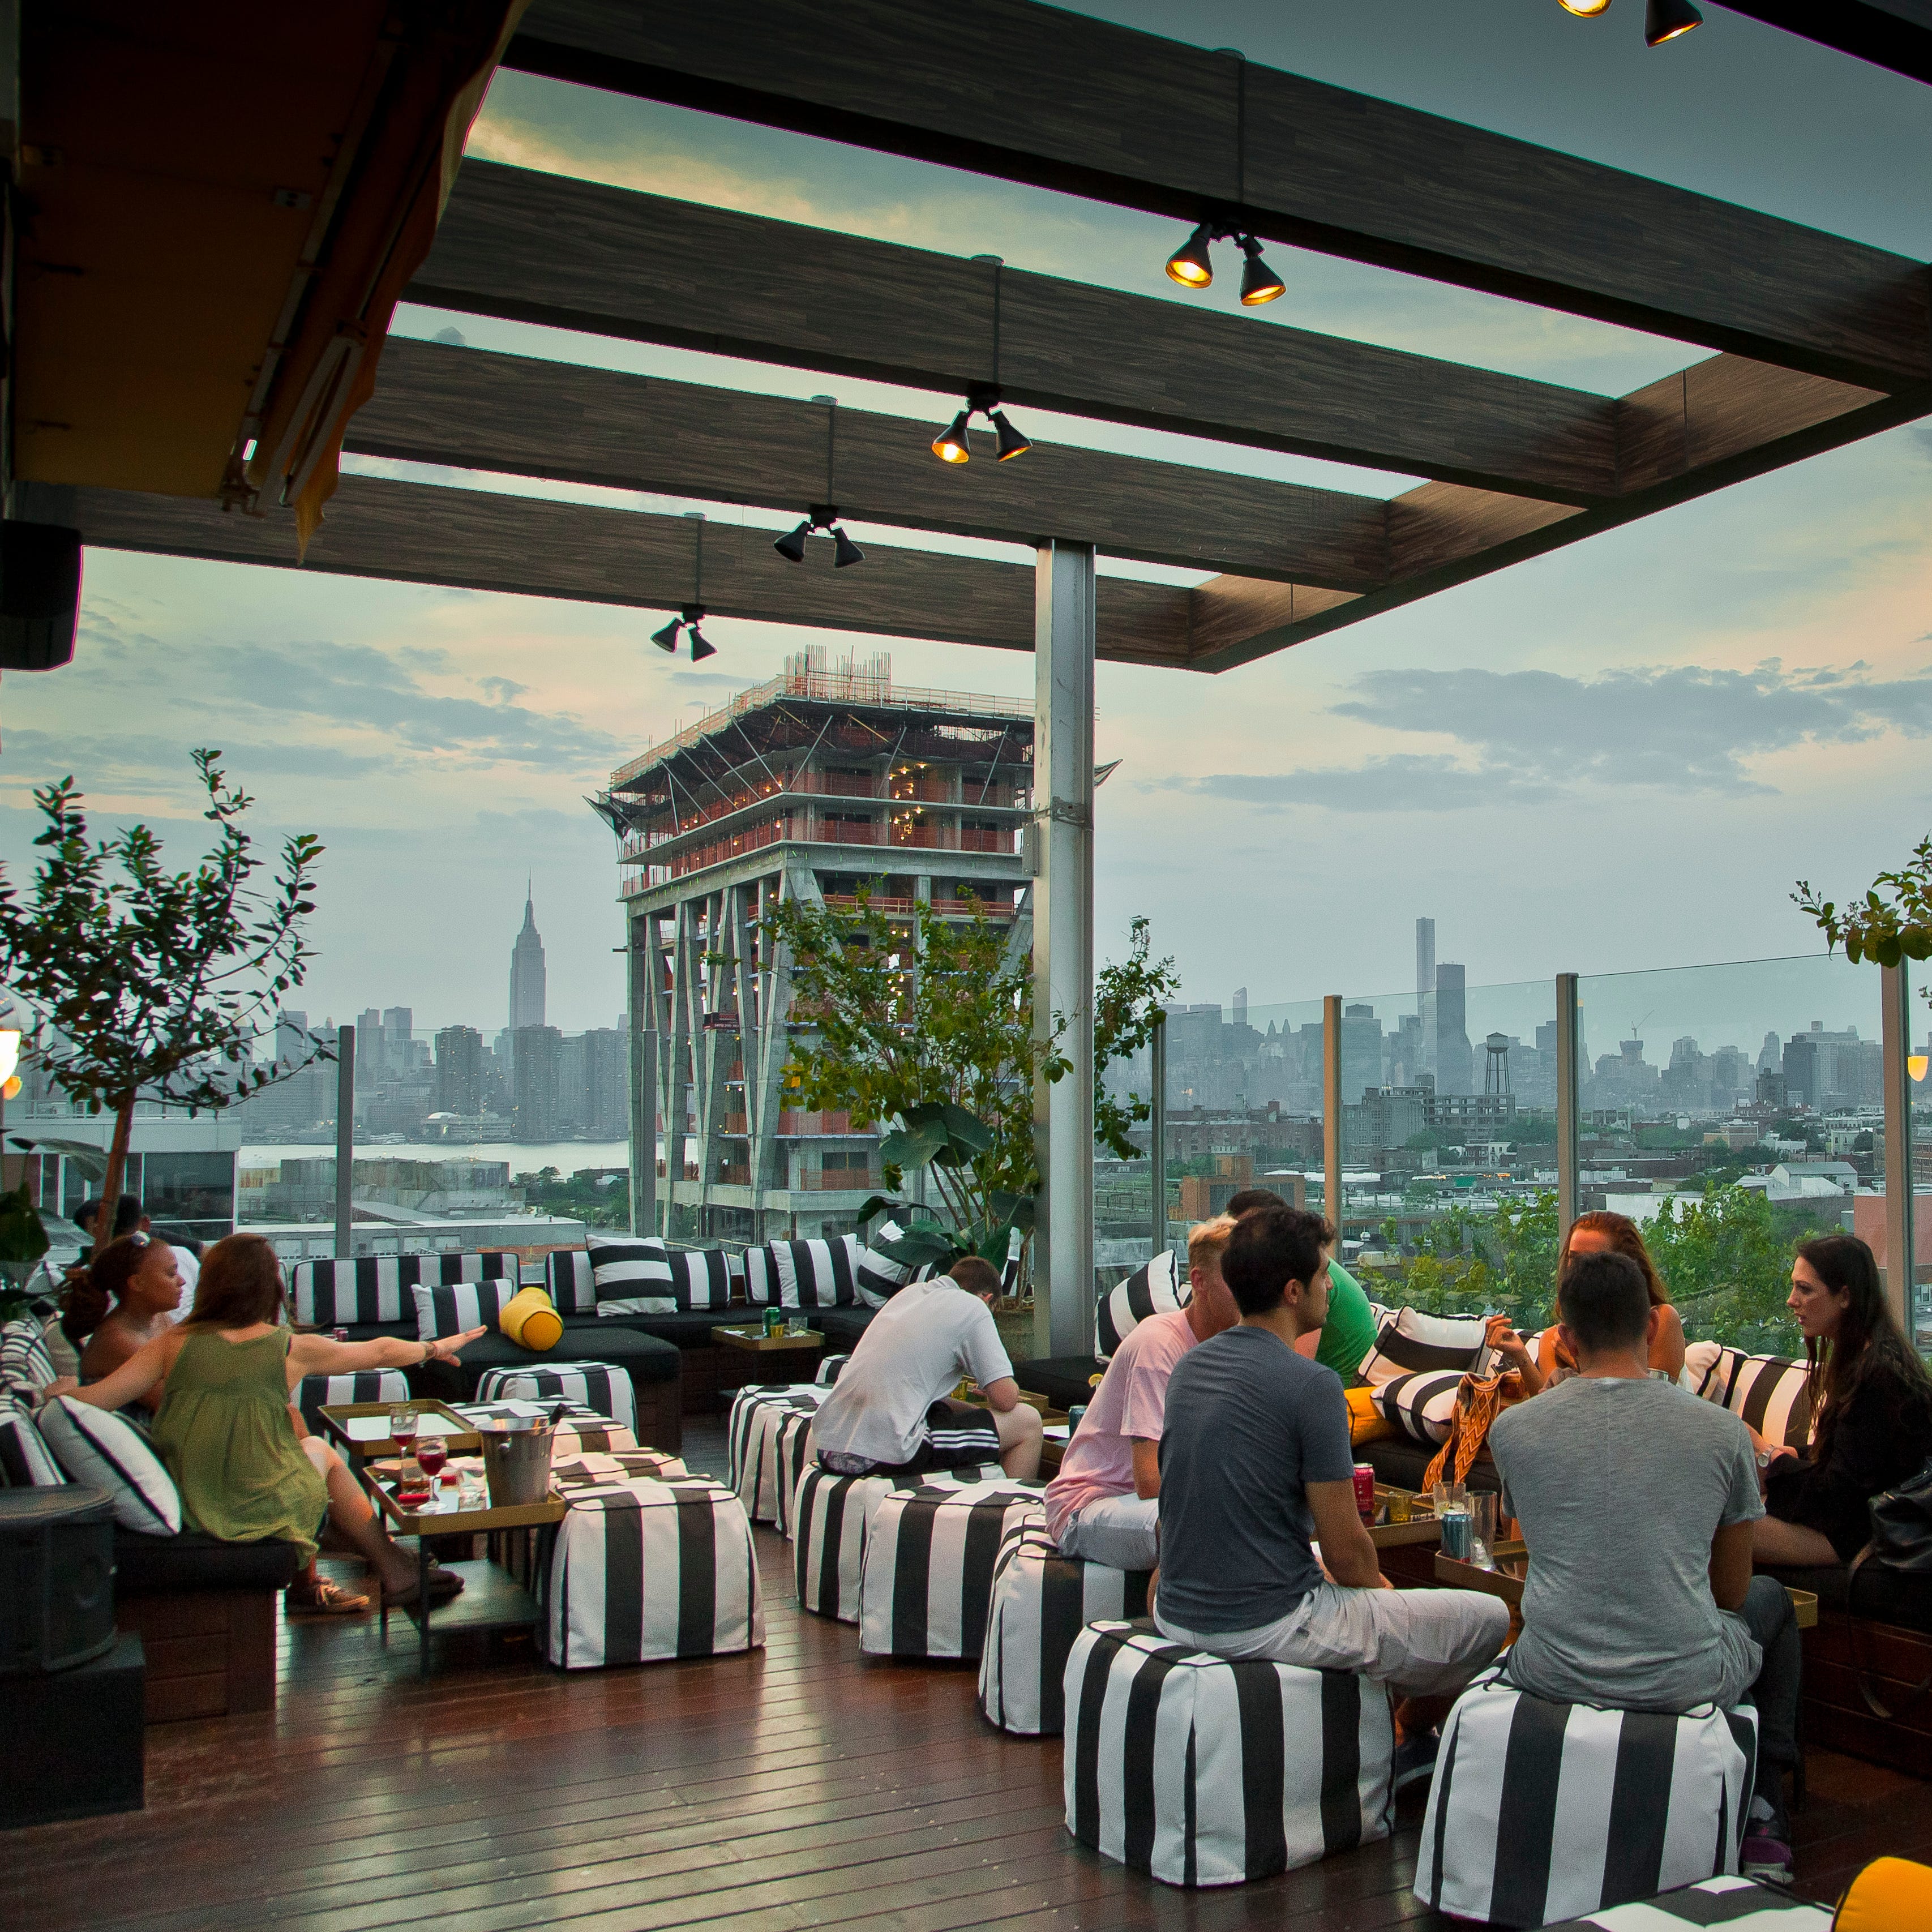 McCarren Hotel & Pool offers a rooftop bar in Brooklyn's Williamsburg neighborhood with food and cocktails.